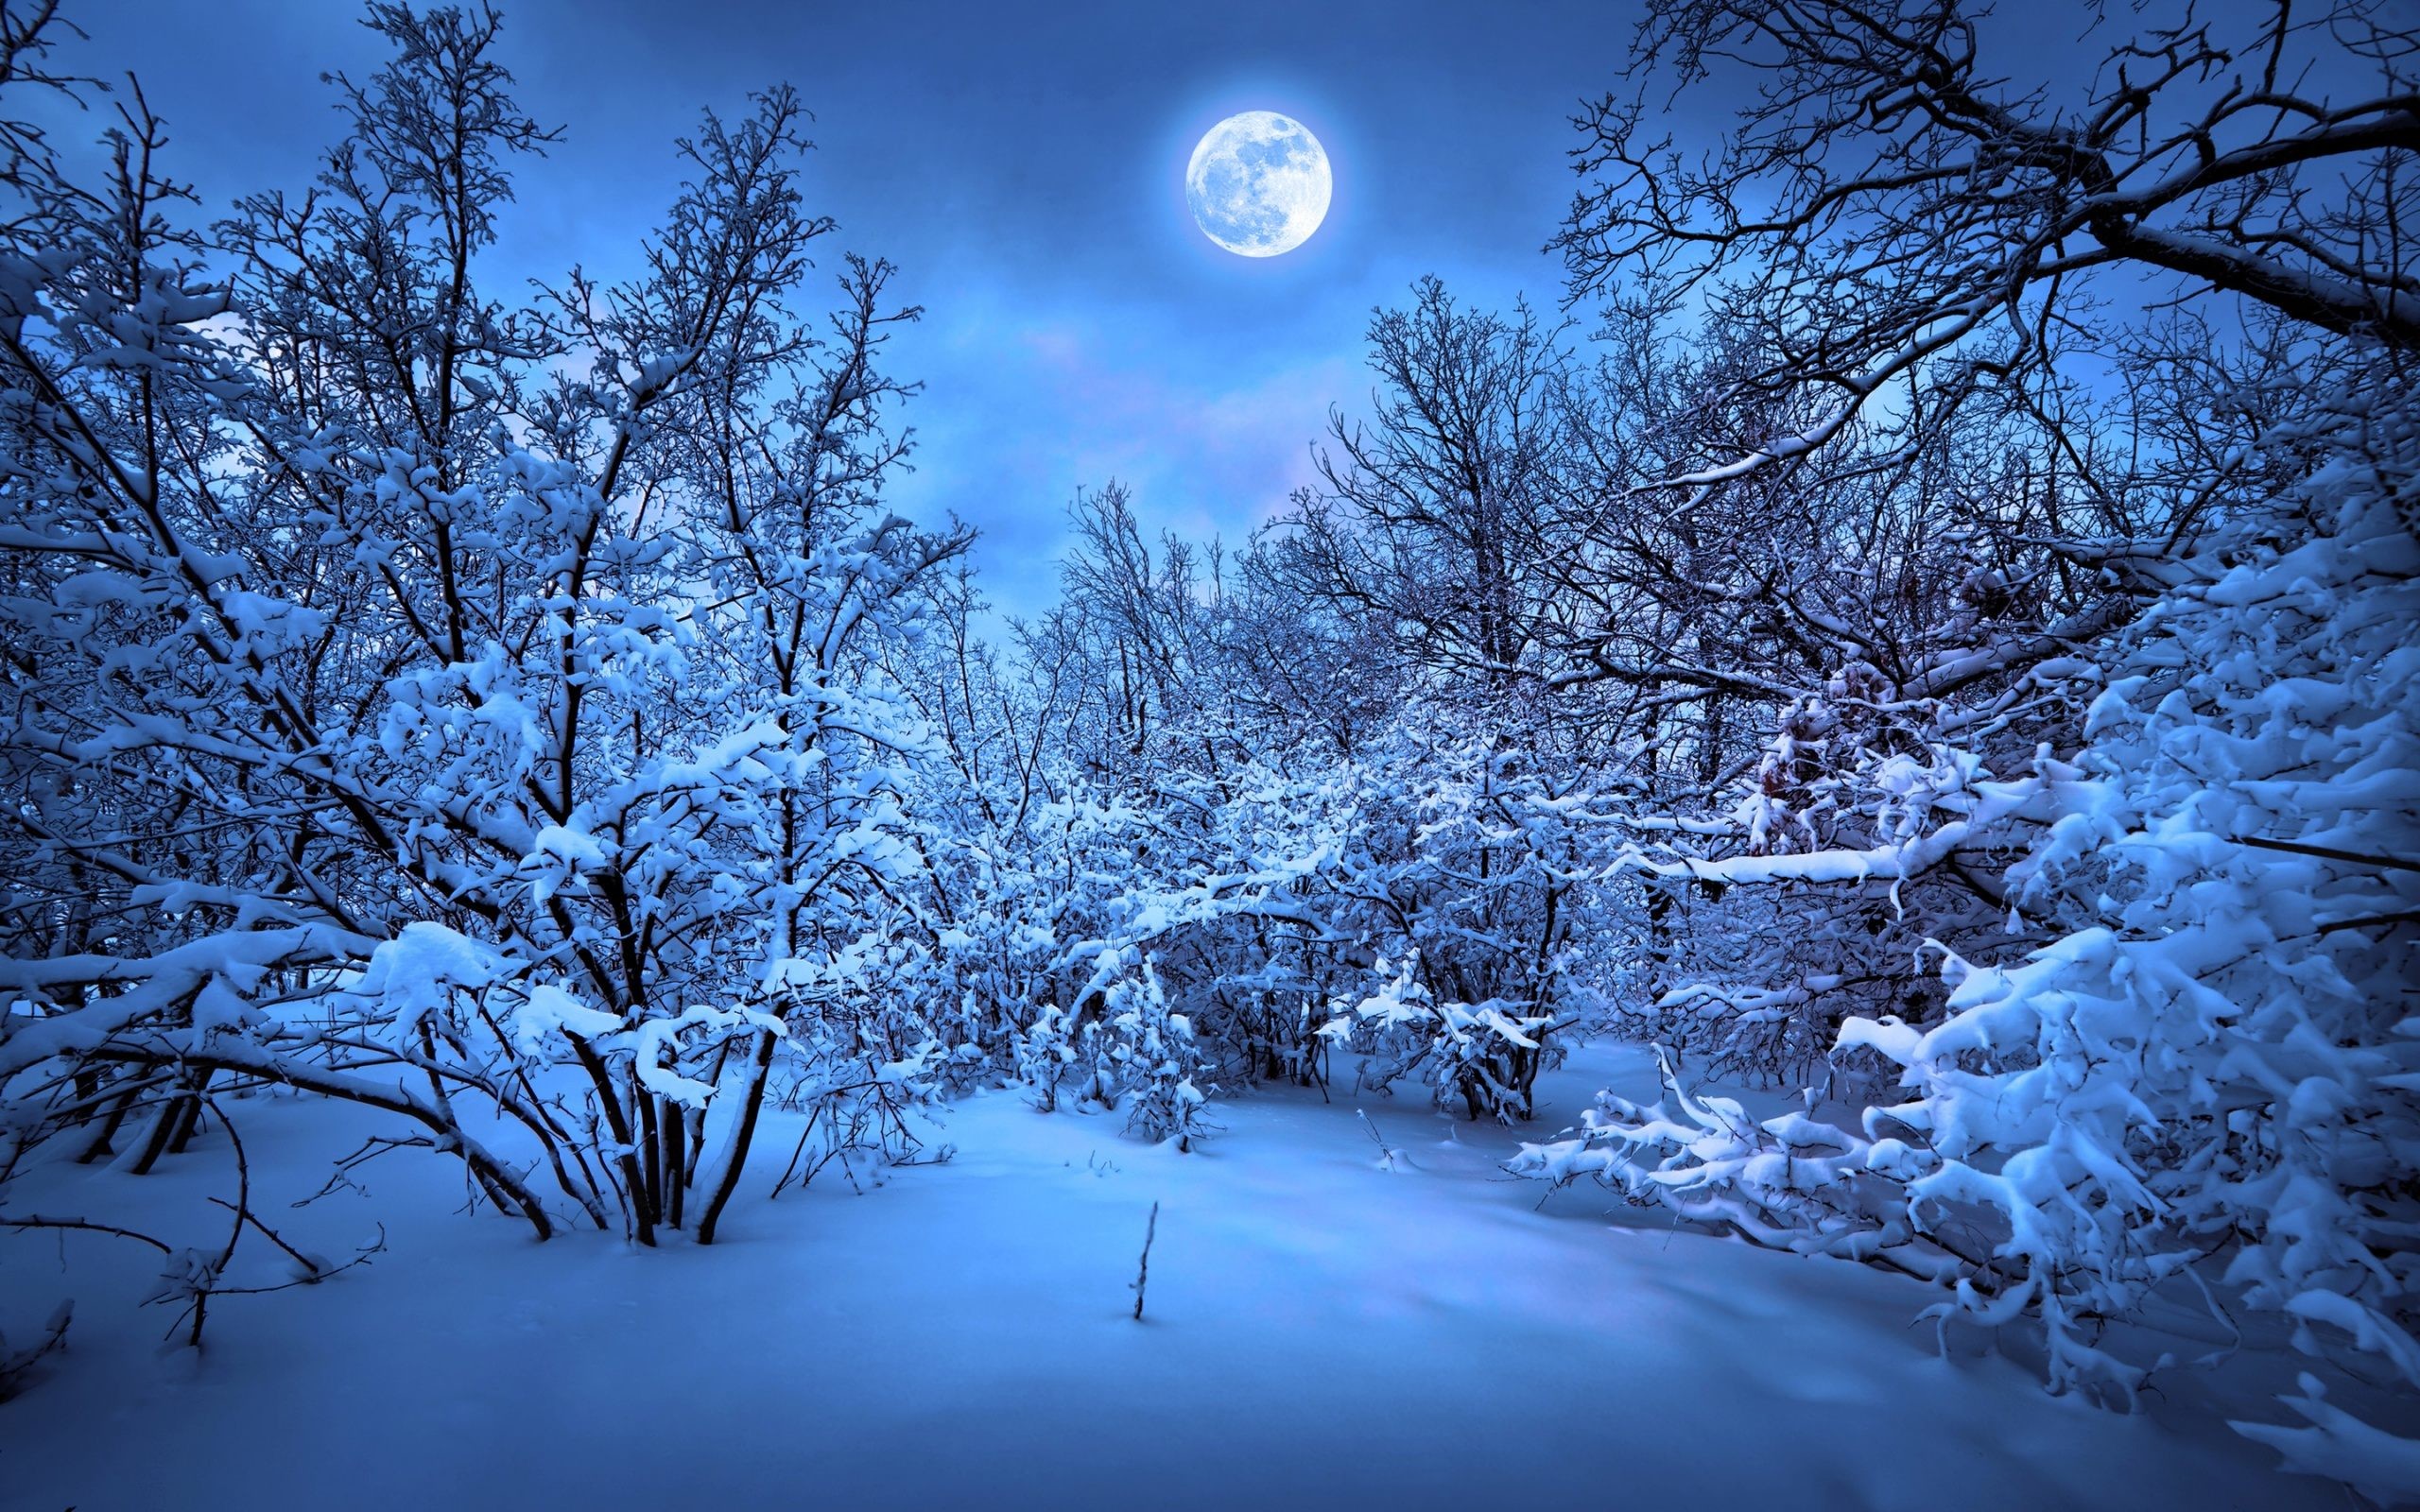 Romantic Winter Wallpaper Images with High Resolution Wallpaper